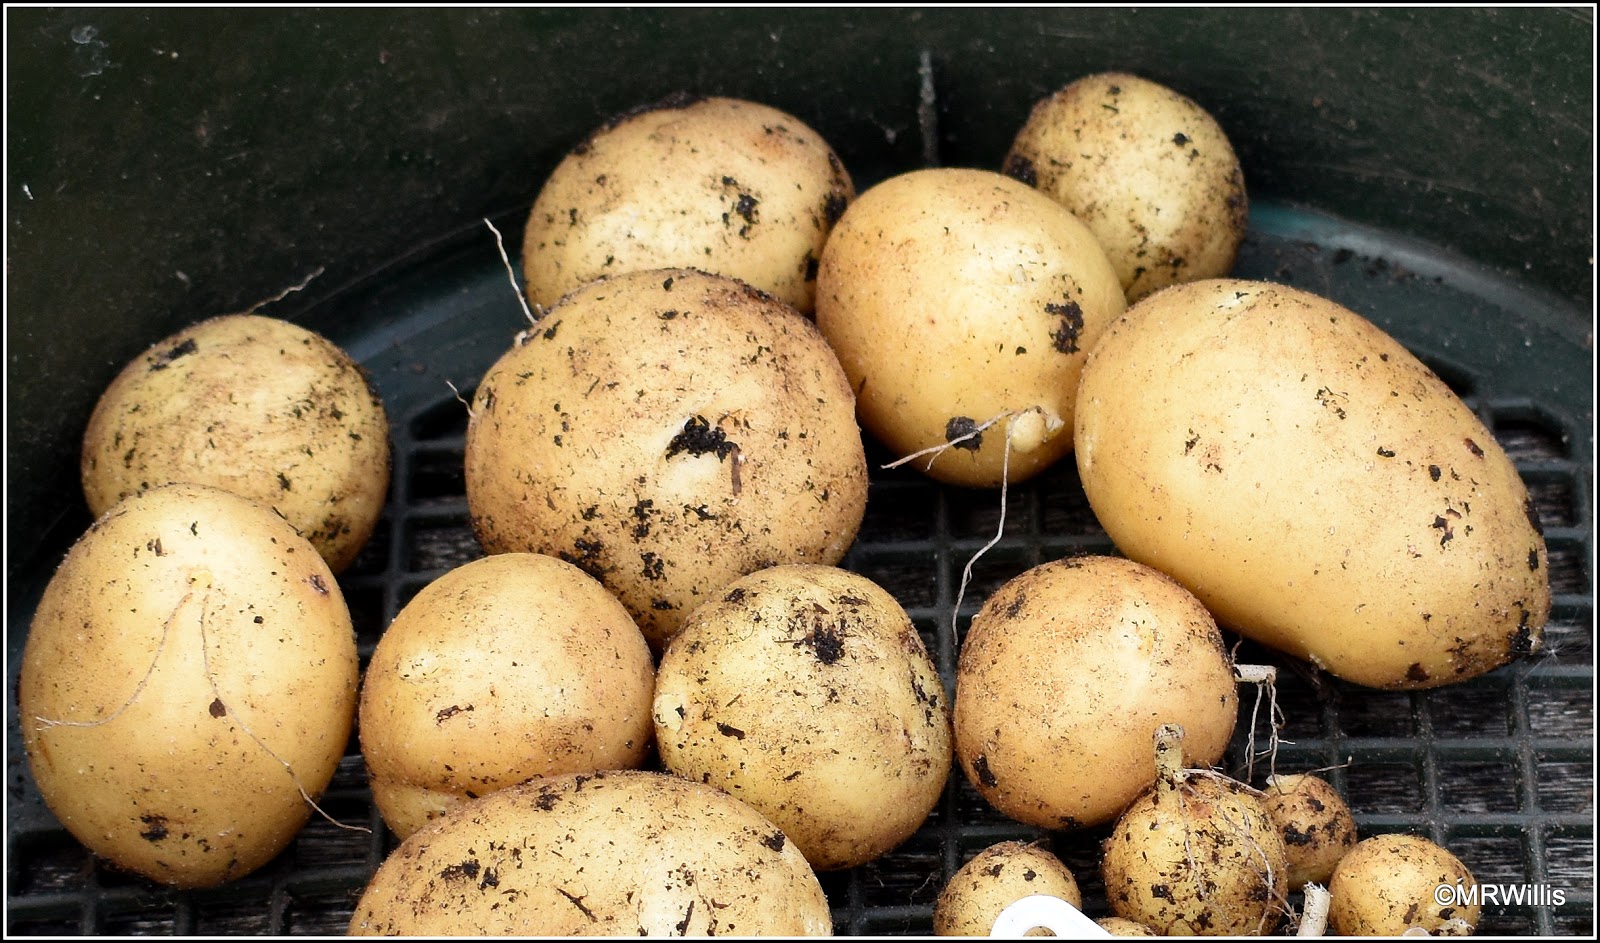 Mark's Veg Plot: The first of the new potatoes